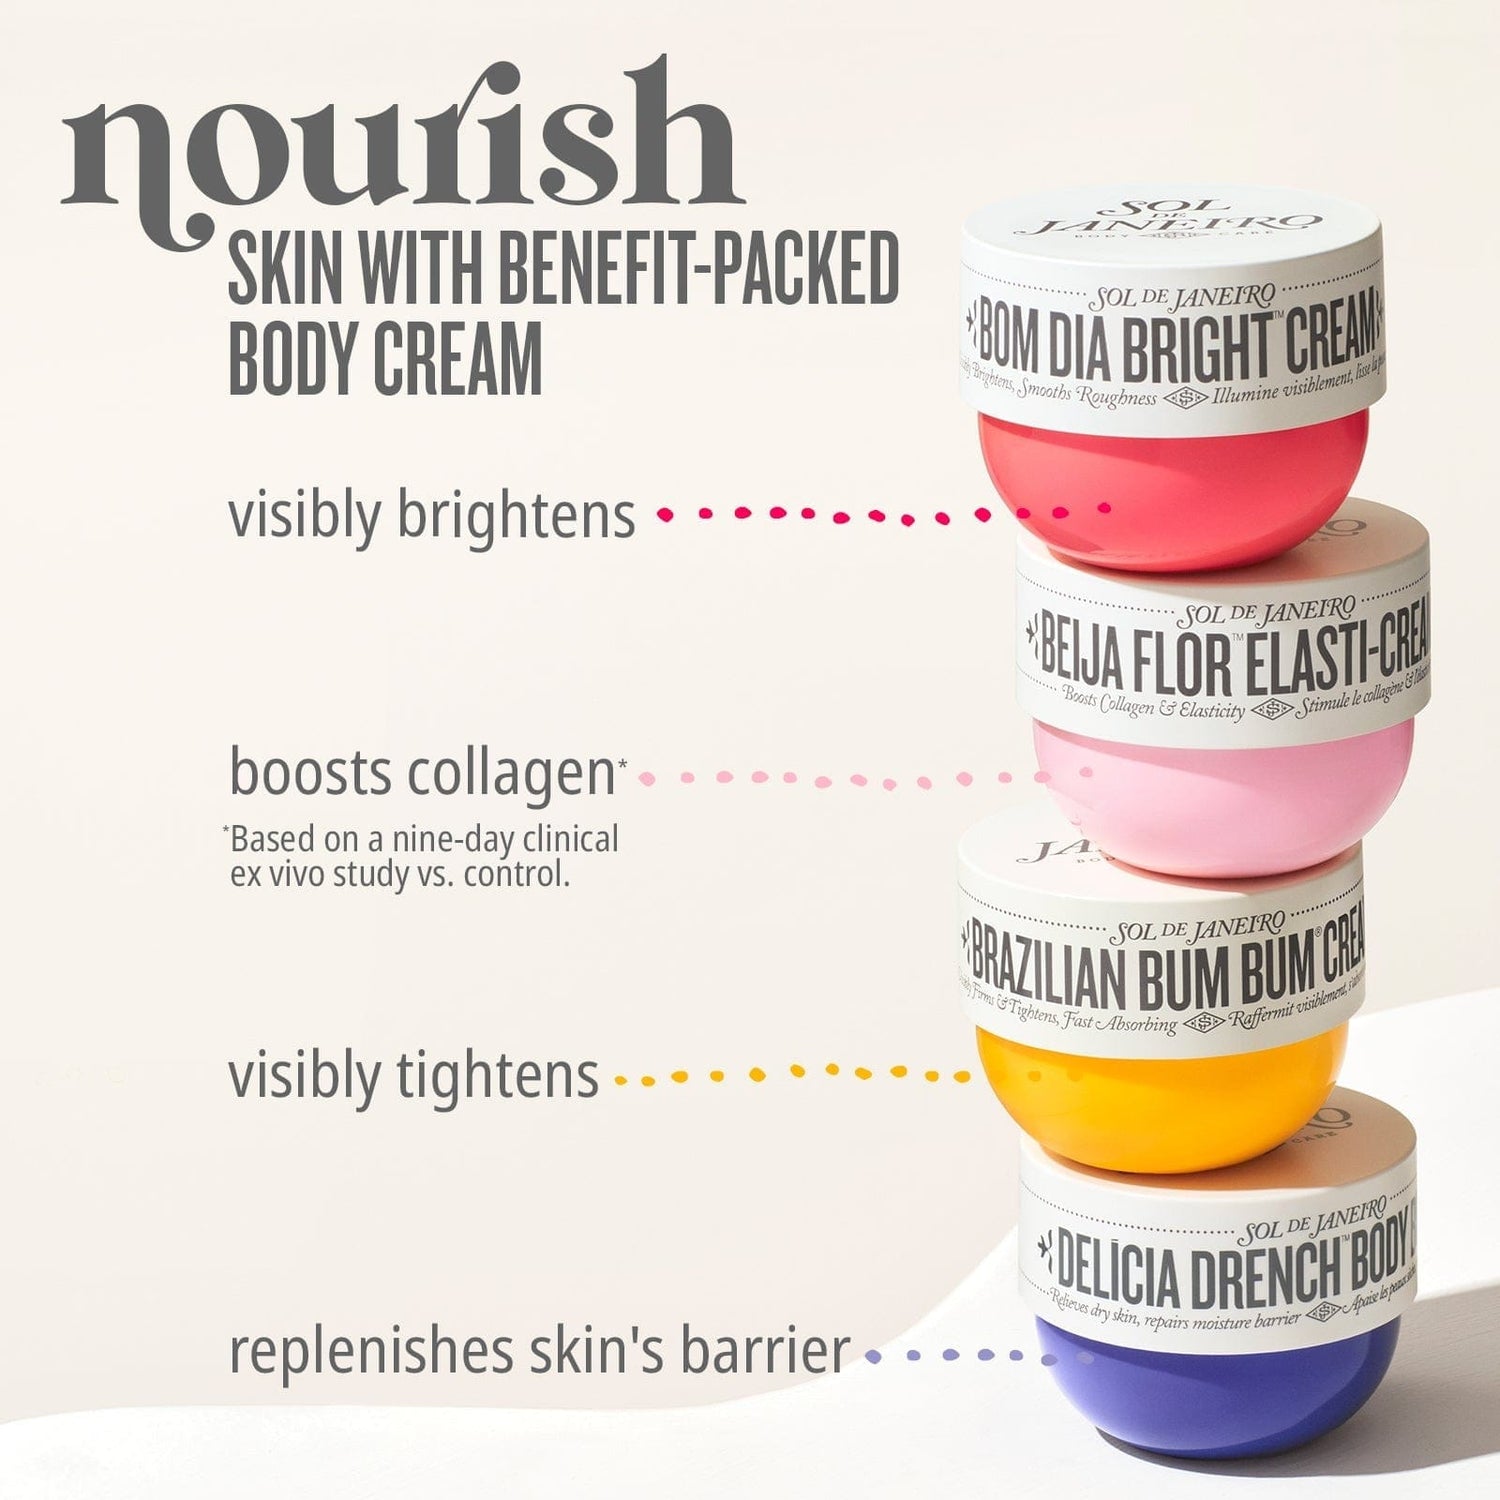 Nourish skin with benefit-packed body cream. Bom Dia Bright Cream - Visibly brightens. Beija Flor Elasti-cream - boosts collagen*, *Based on a nine-day clinical ex vivo study vs. control. Bum Bum Cream - visibly tightens. Delicia Drench Body Butter - replenishes skin&